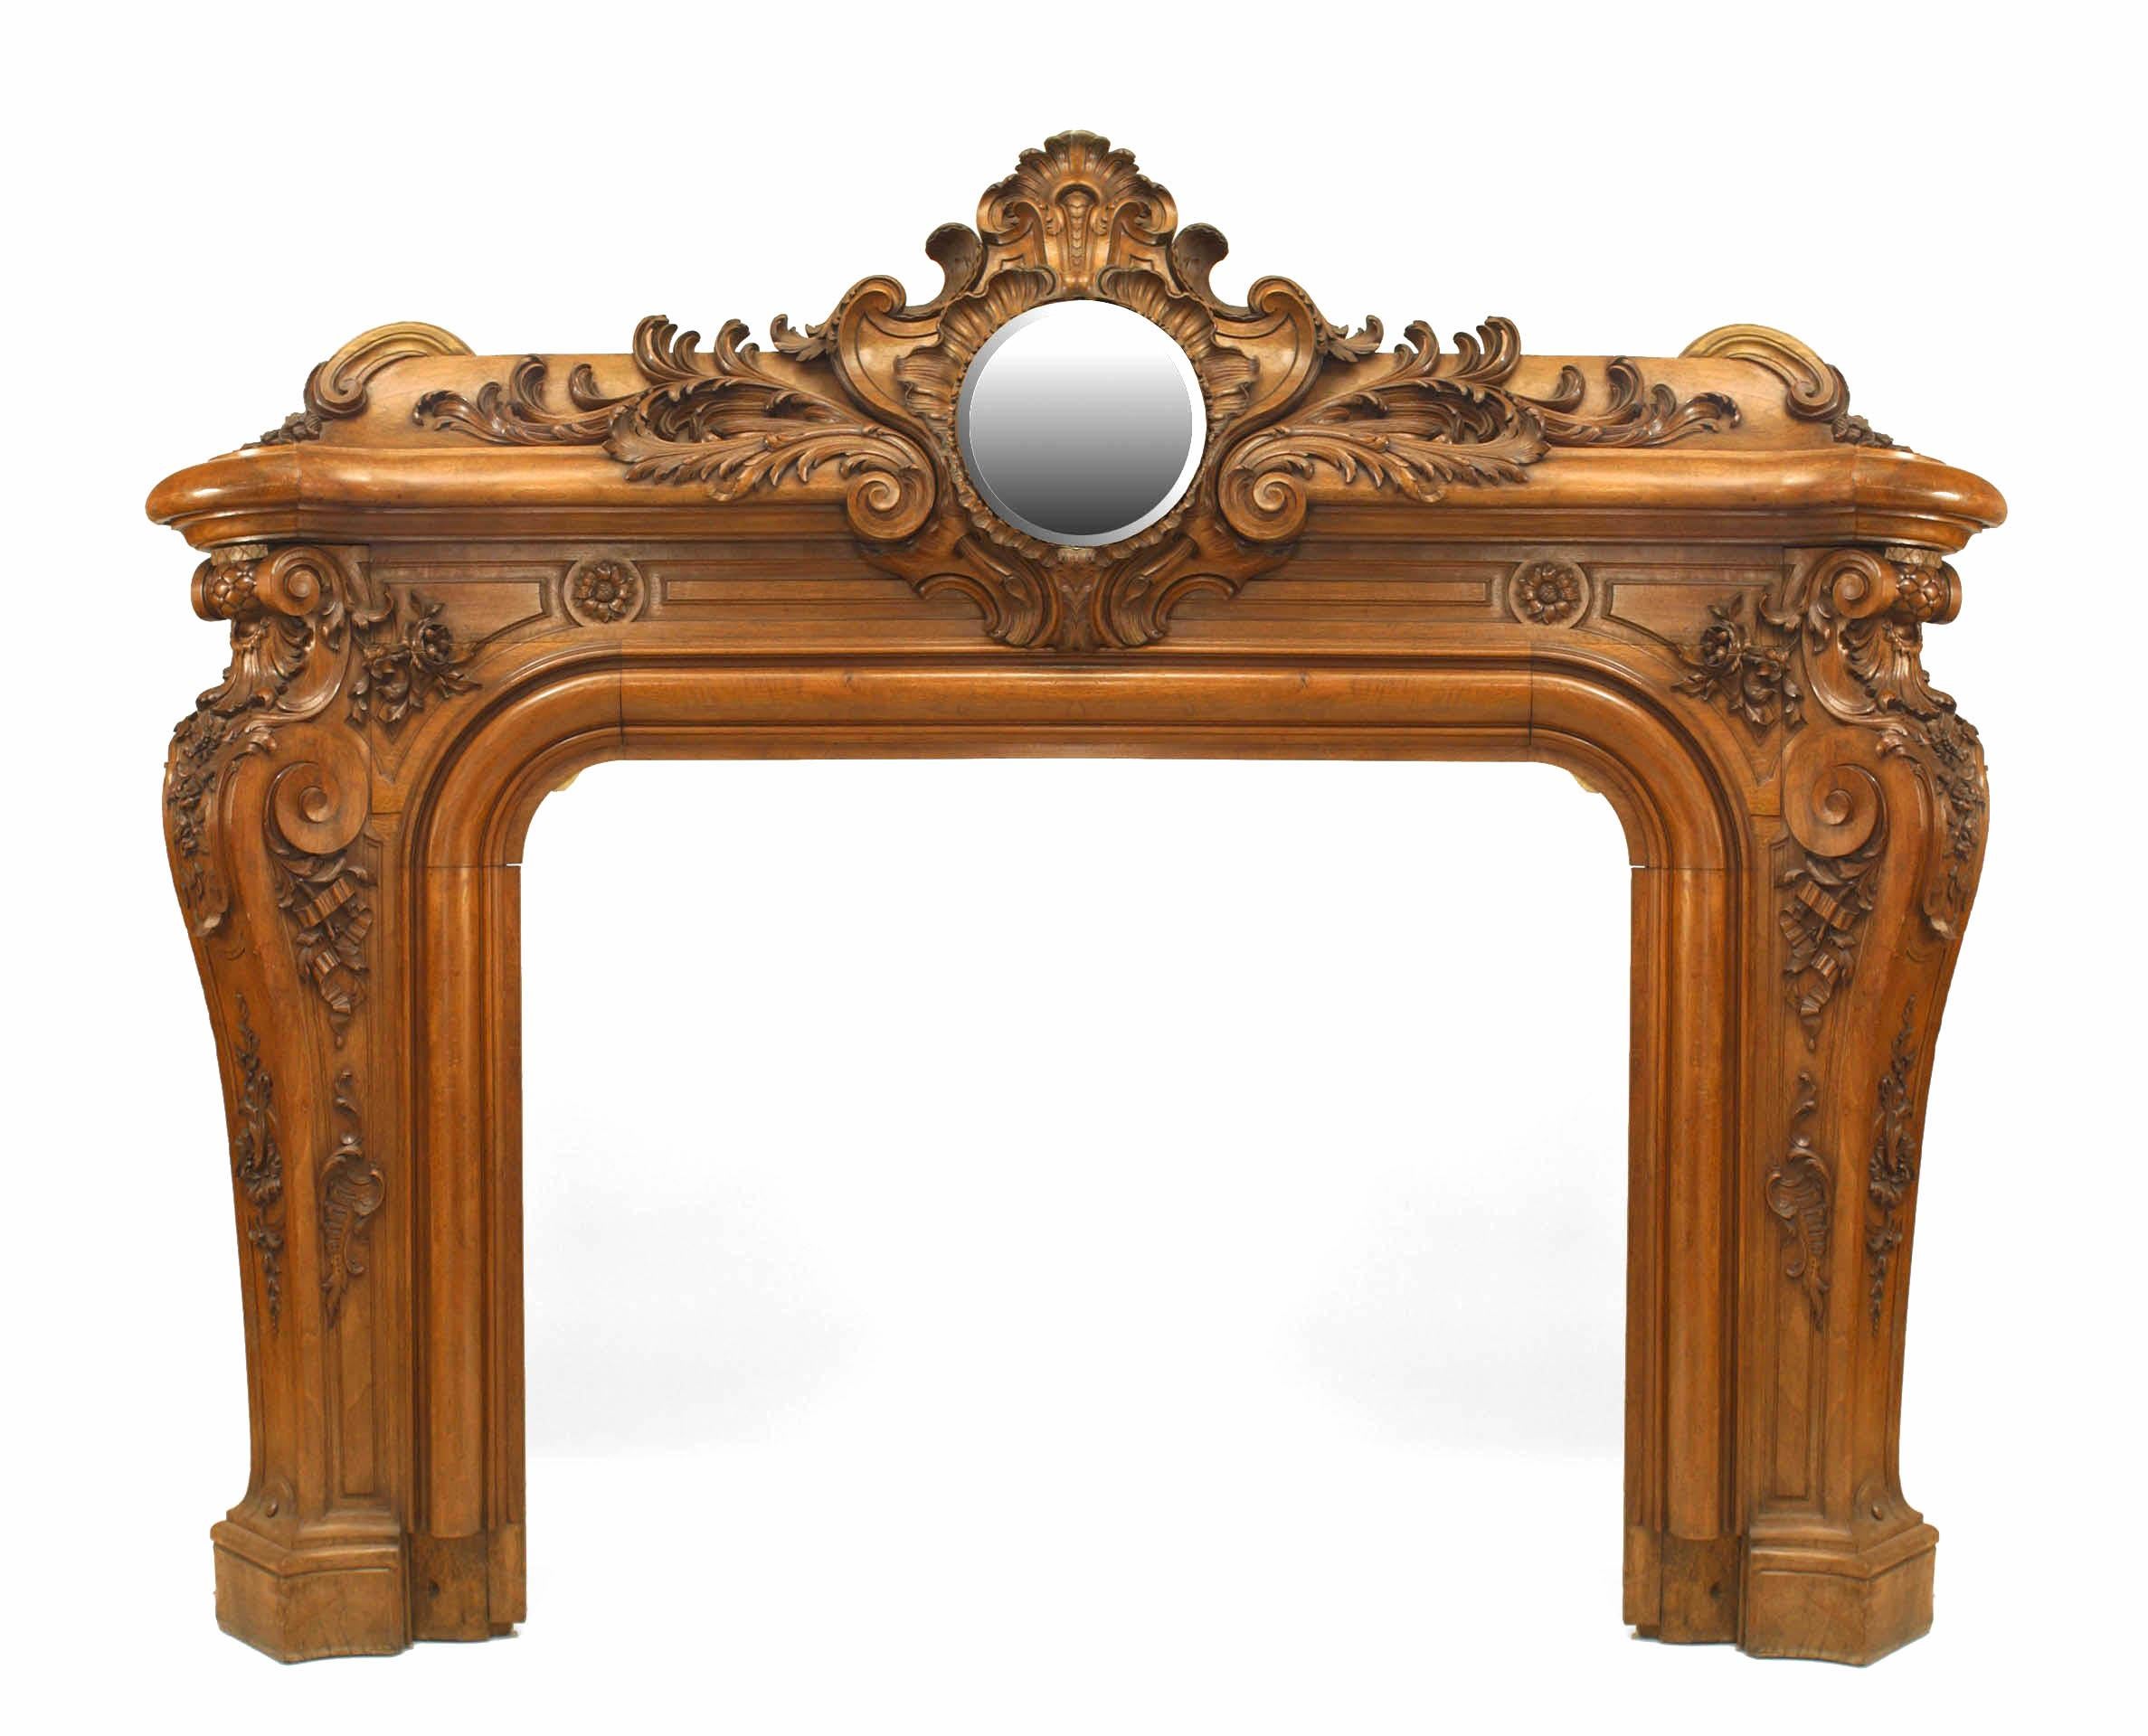 French Louis XV-style (3rd Quarter 19th Century) walnut fireplace mantel with a circular mirrored panel above a C scroll and rockwork carved surround (Reputedly from Napoleon III's library) (Related items: 031616, 032213).
